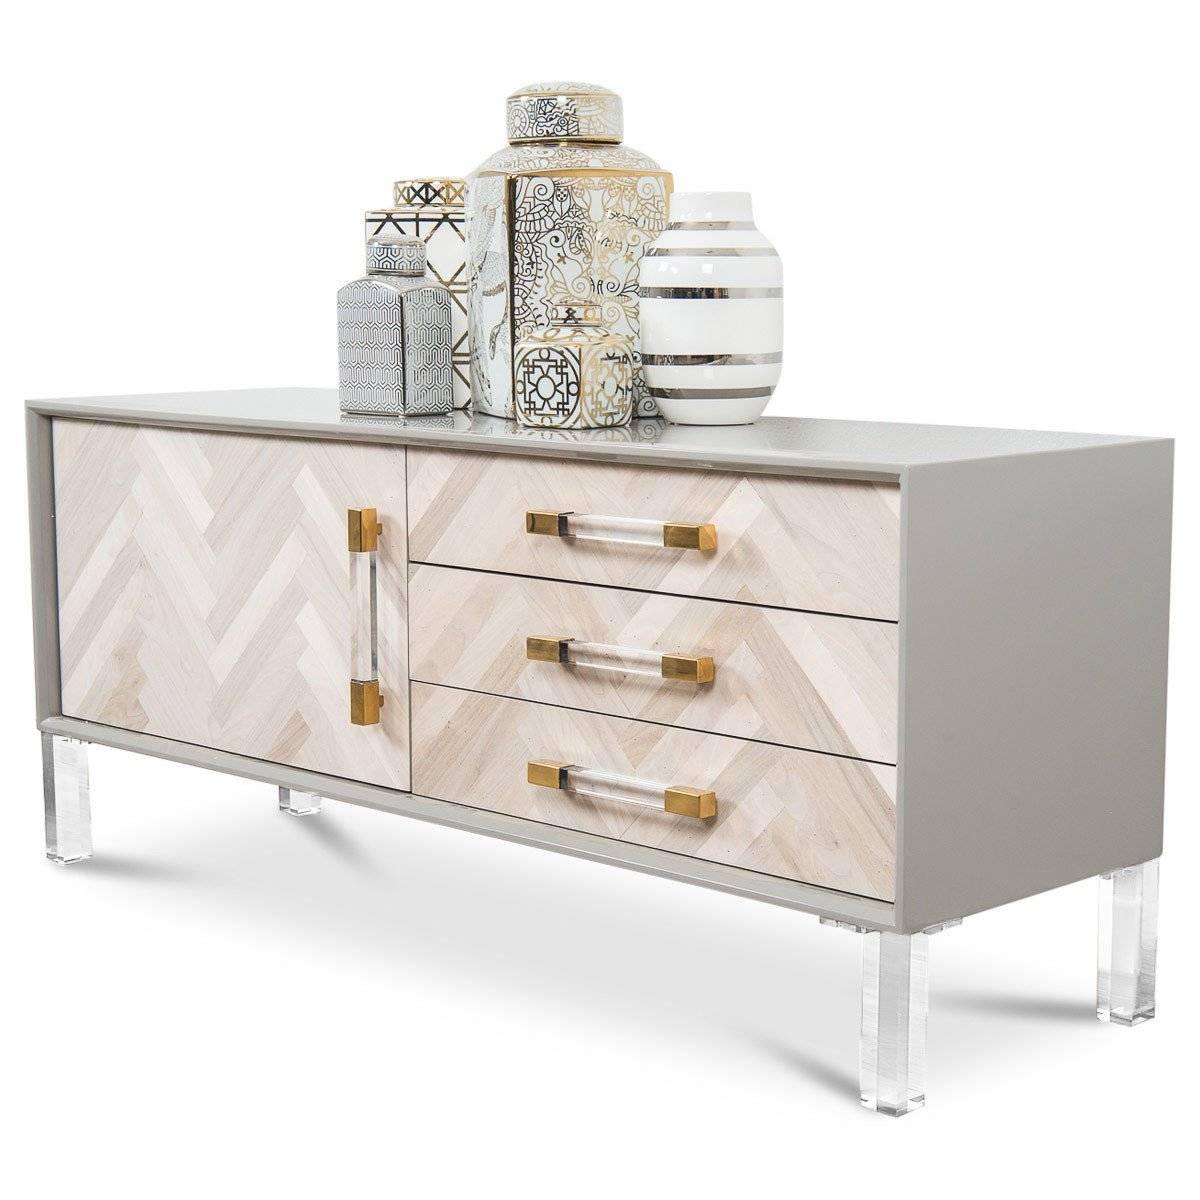 The Amalfi one door three-drawer credenza with its recycled wood doors is perfect for any space. It comes with a graystone case finish, Lucite legs and the walnut wood on the doors create a large herringbone effect.

Dimensions:
60